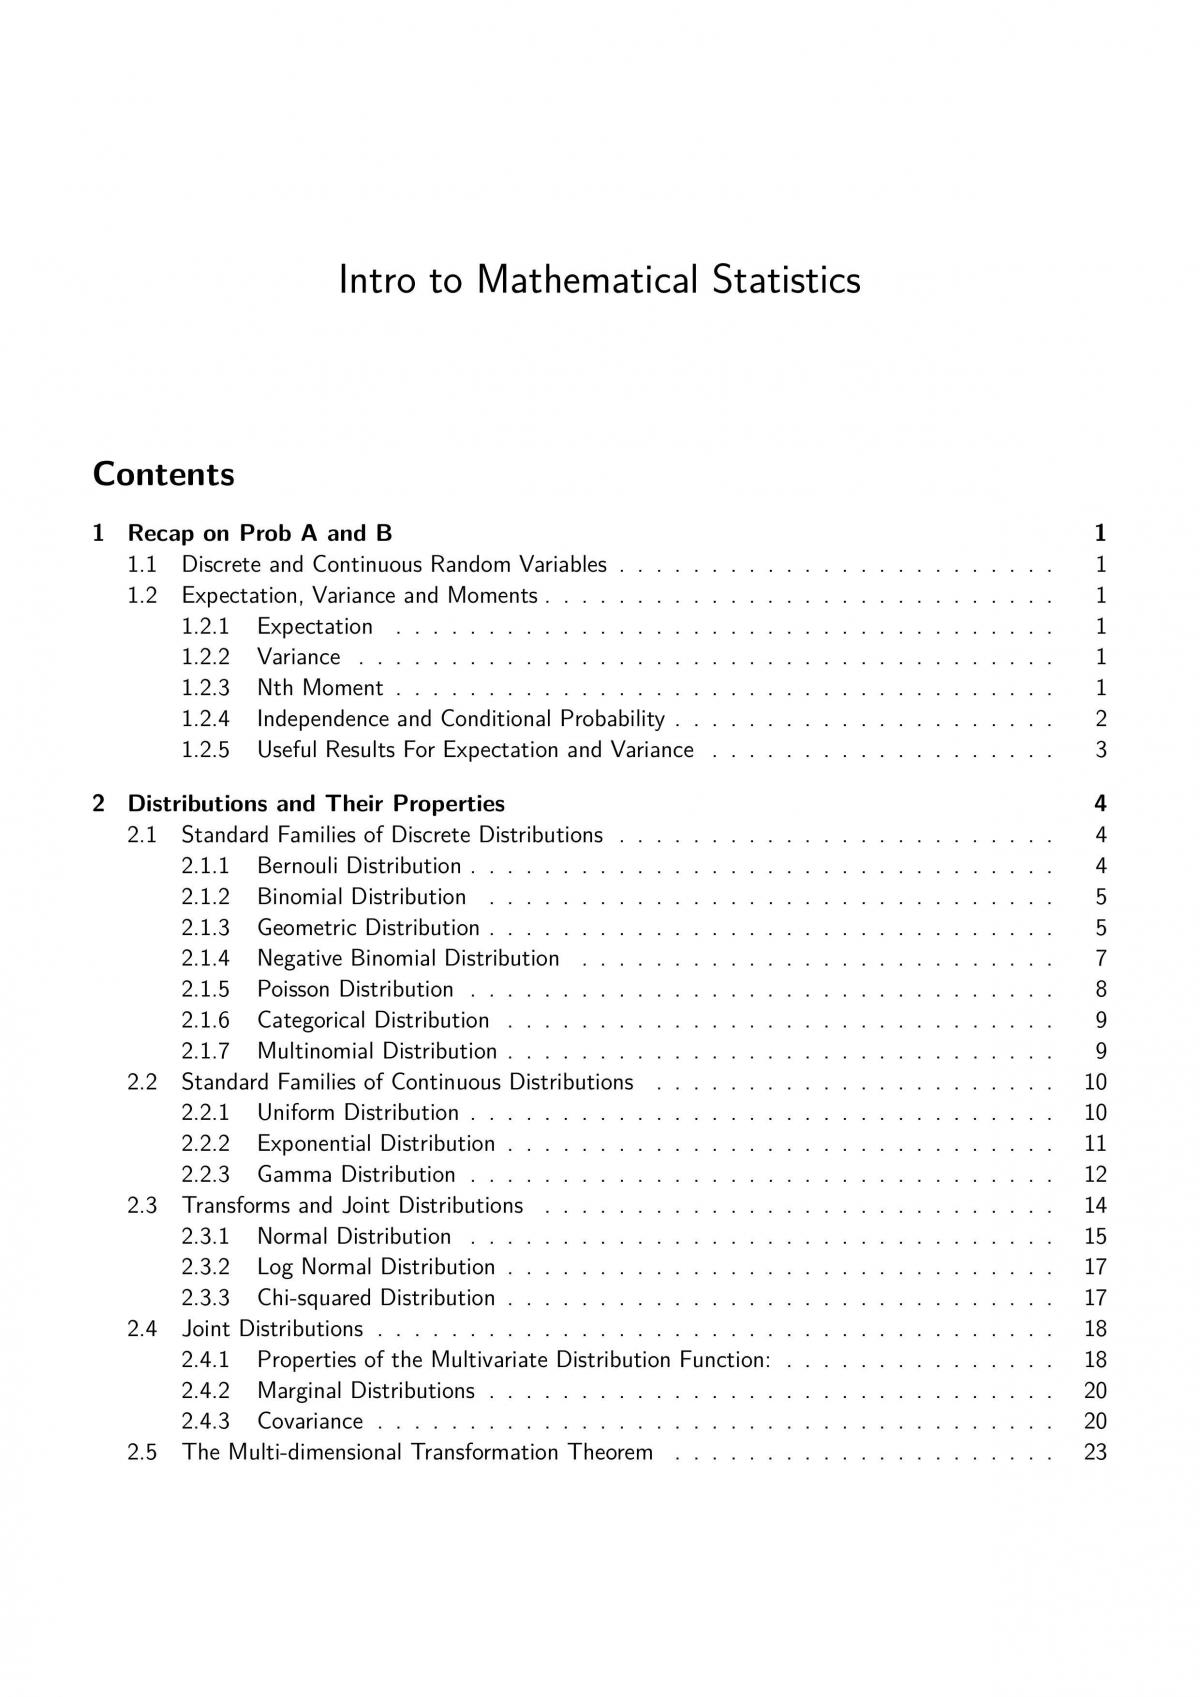 ST220I Introduction to Mathematical Statistics Notes - Page 1